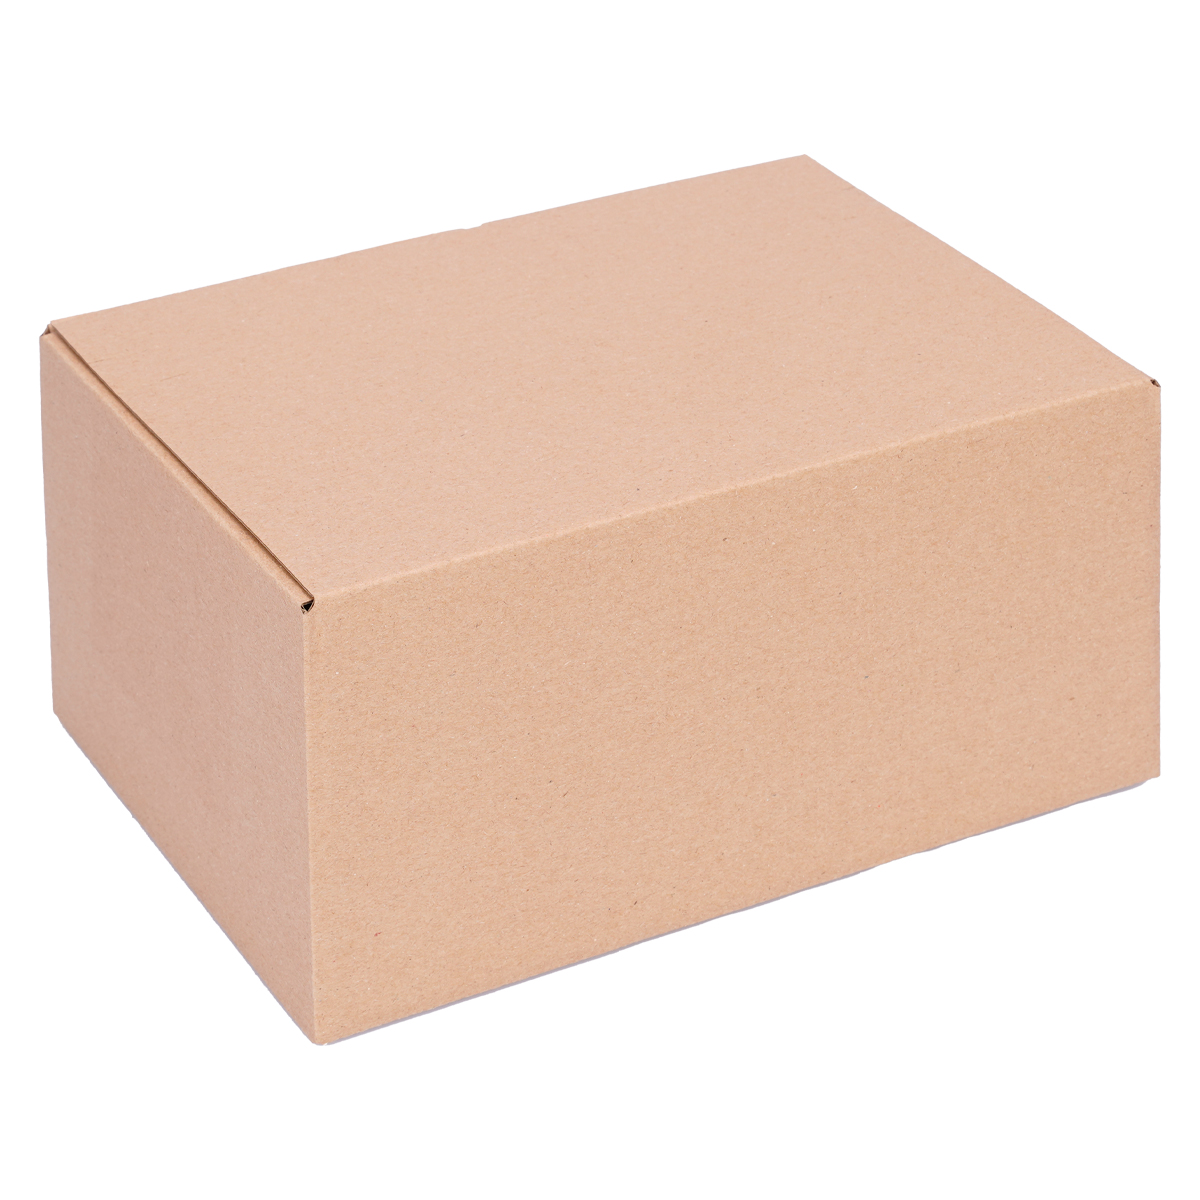 Automatic box 230x165x115 mm with self-adhesive lid - VP 35